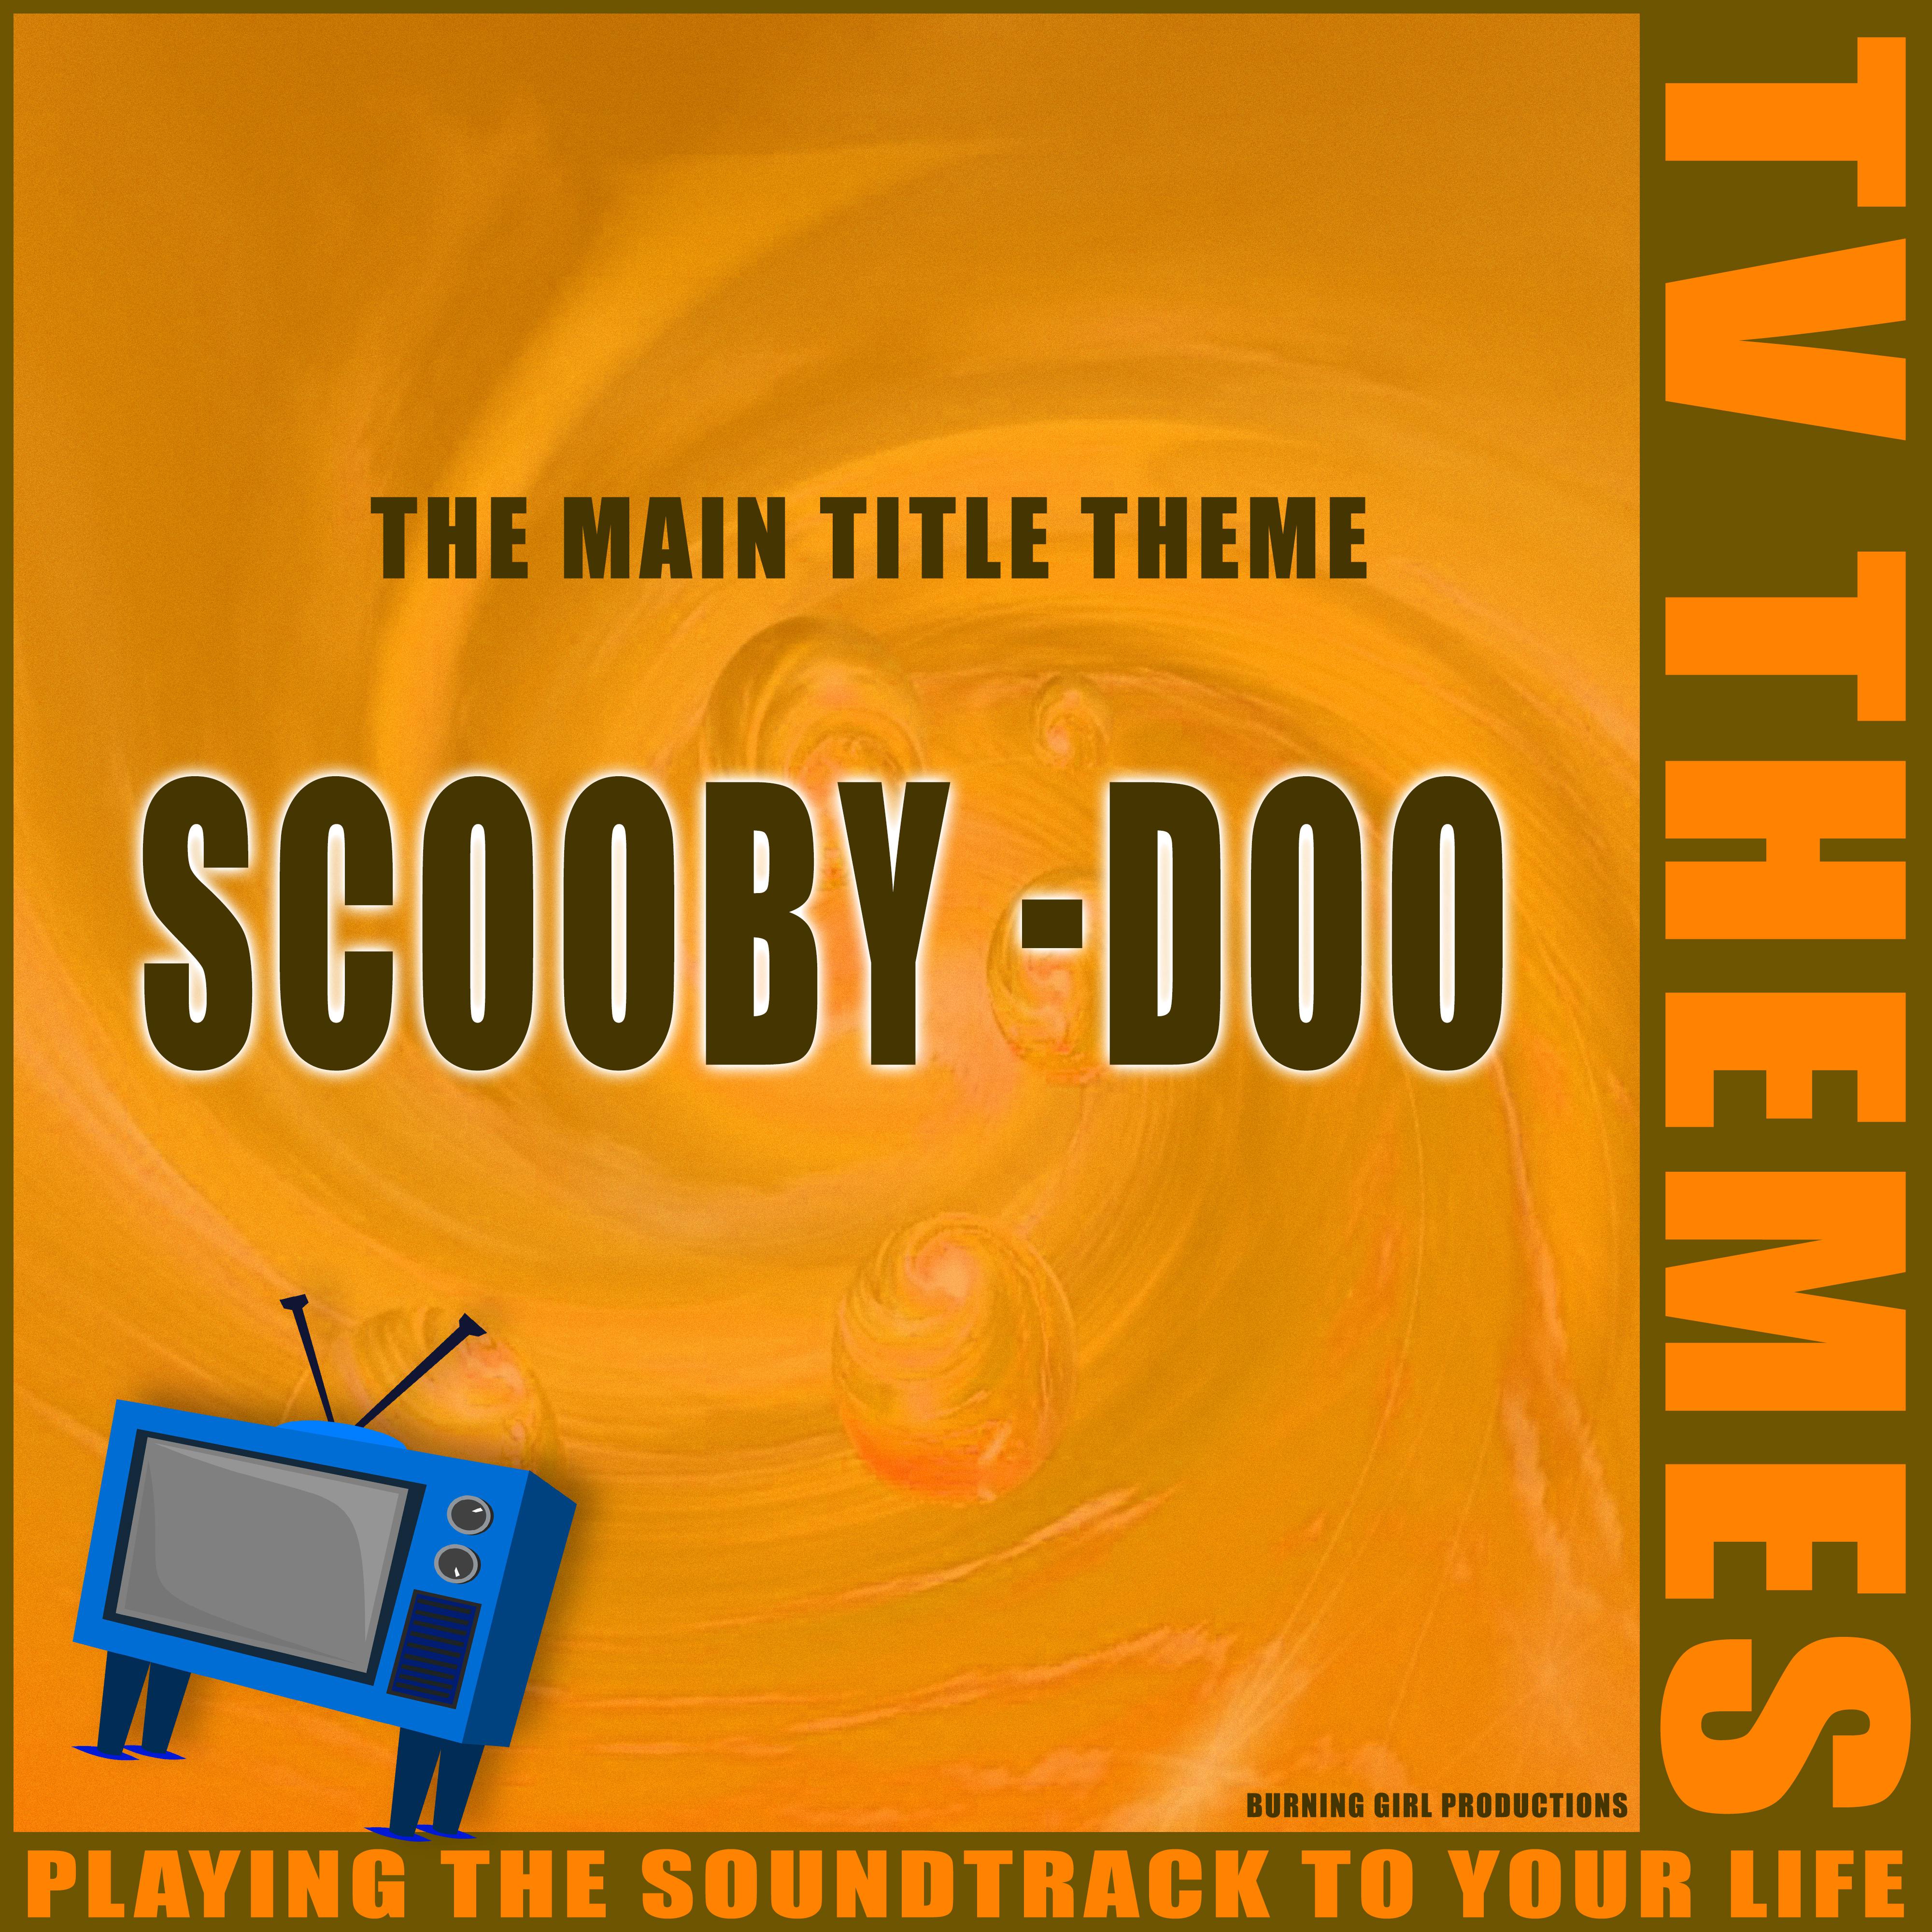 The Main Title Theme - Scooby-Doo